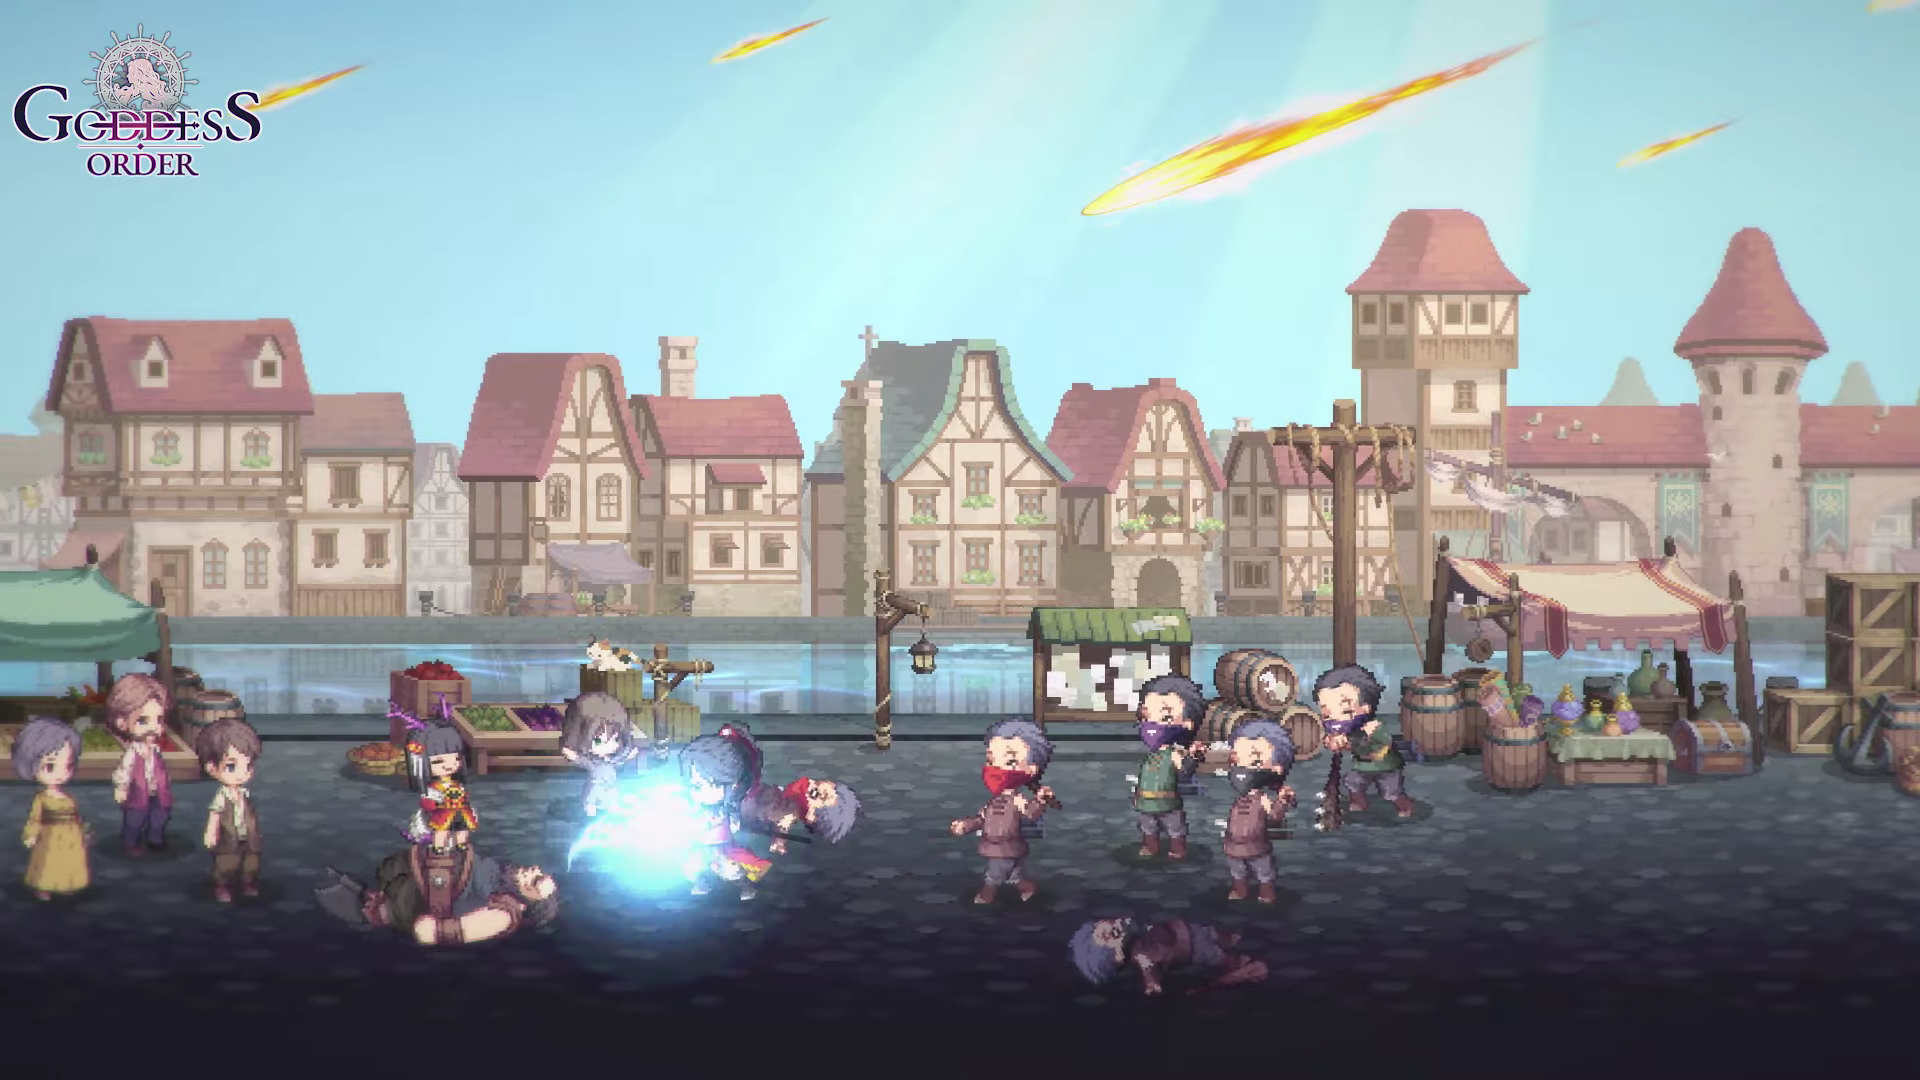 Goddess Order: Exciting Teaser for New Side-Scrolling RPG from Kakao Games